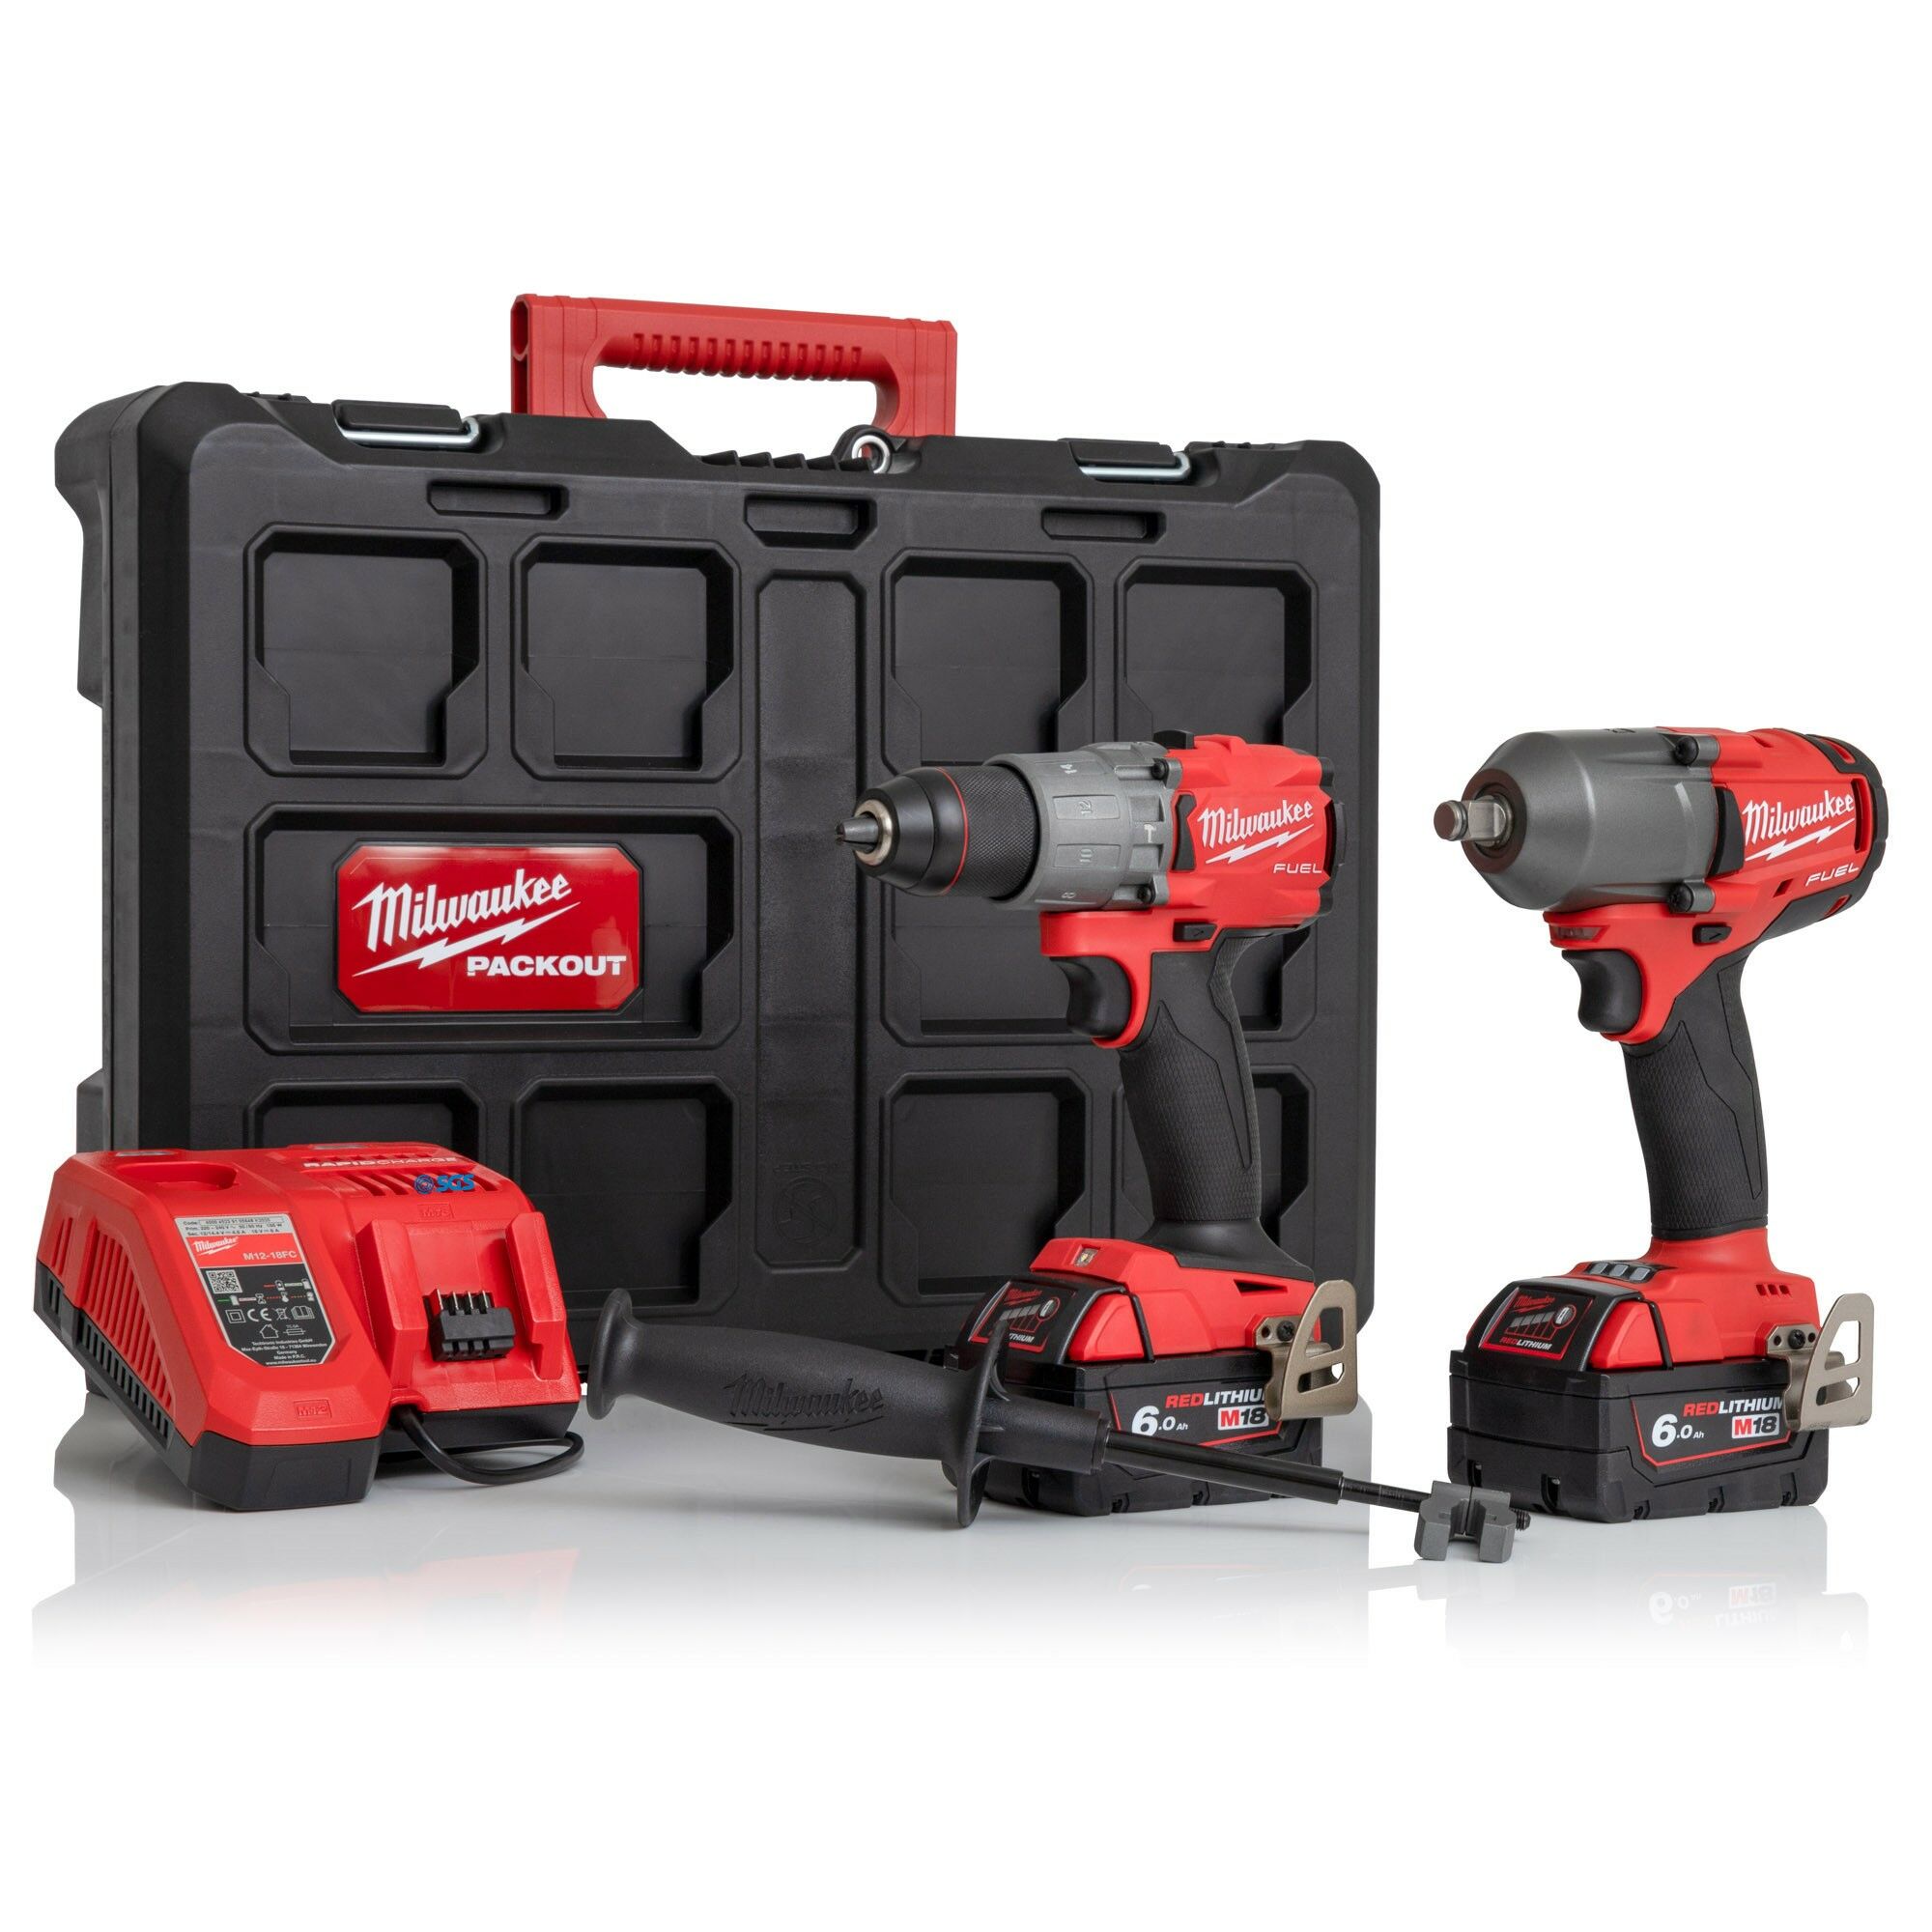 Milwaukee M18FPP2E2-602P FUEL™ Combi Drill and Impact Wrench Kit - 2x 6Ah Batteries, Fast Charger and Packout Case